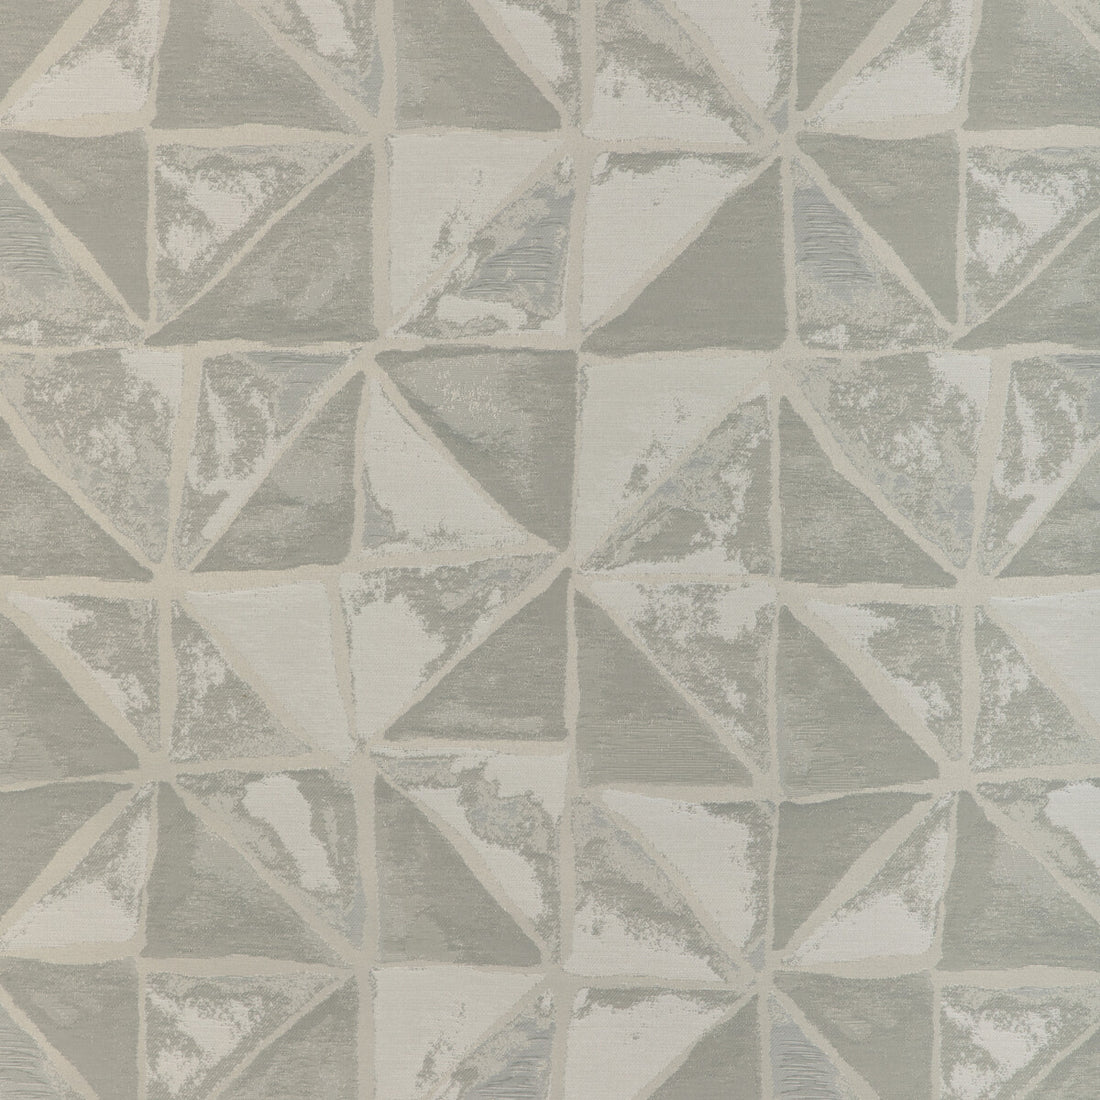 Looking Glass fabric in gesso color - pattern 37076.11.0 - by Kravet Contract in the Chesapeake collection